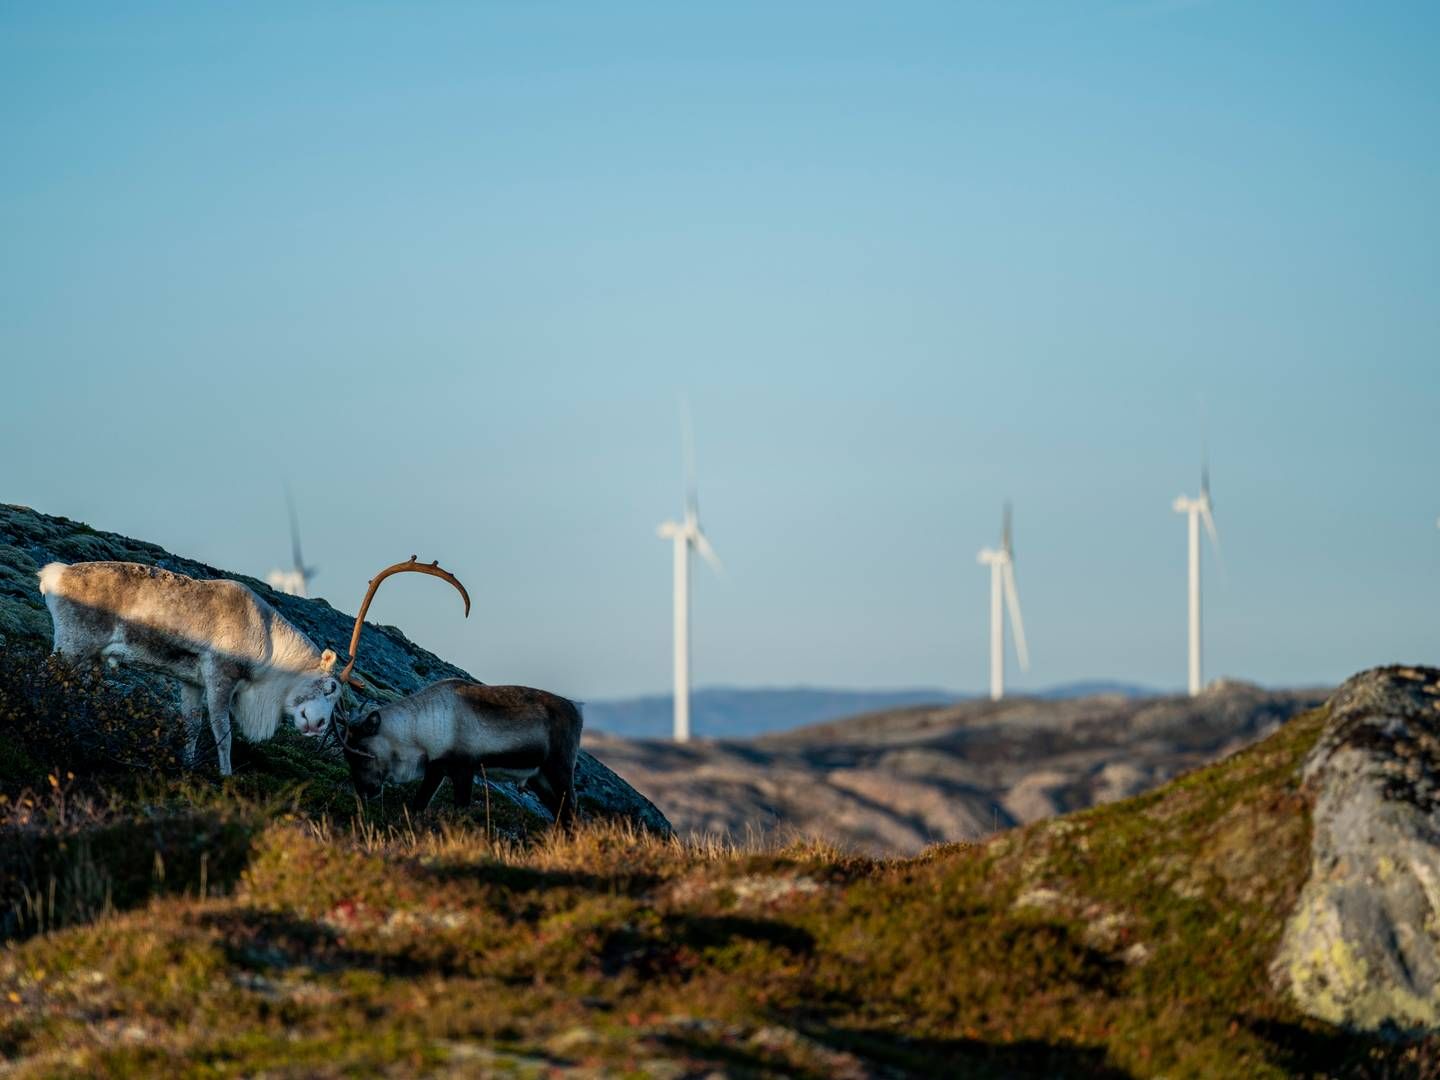 Europe's largest onshore wind farm project, Fosen, is still endangered even though all turbines have been in operation for some time. But there is a need of more land-based wind power in Norway, according to new partnership. | Photo: Fosen Vind